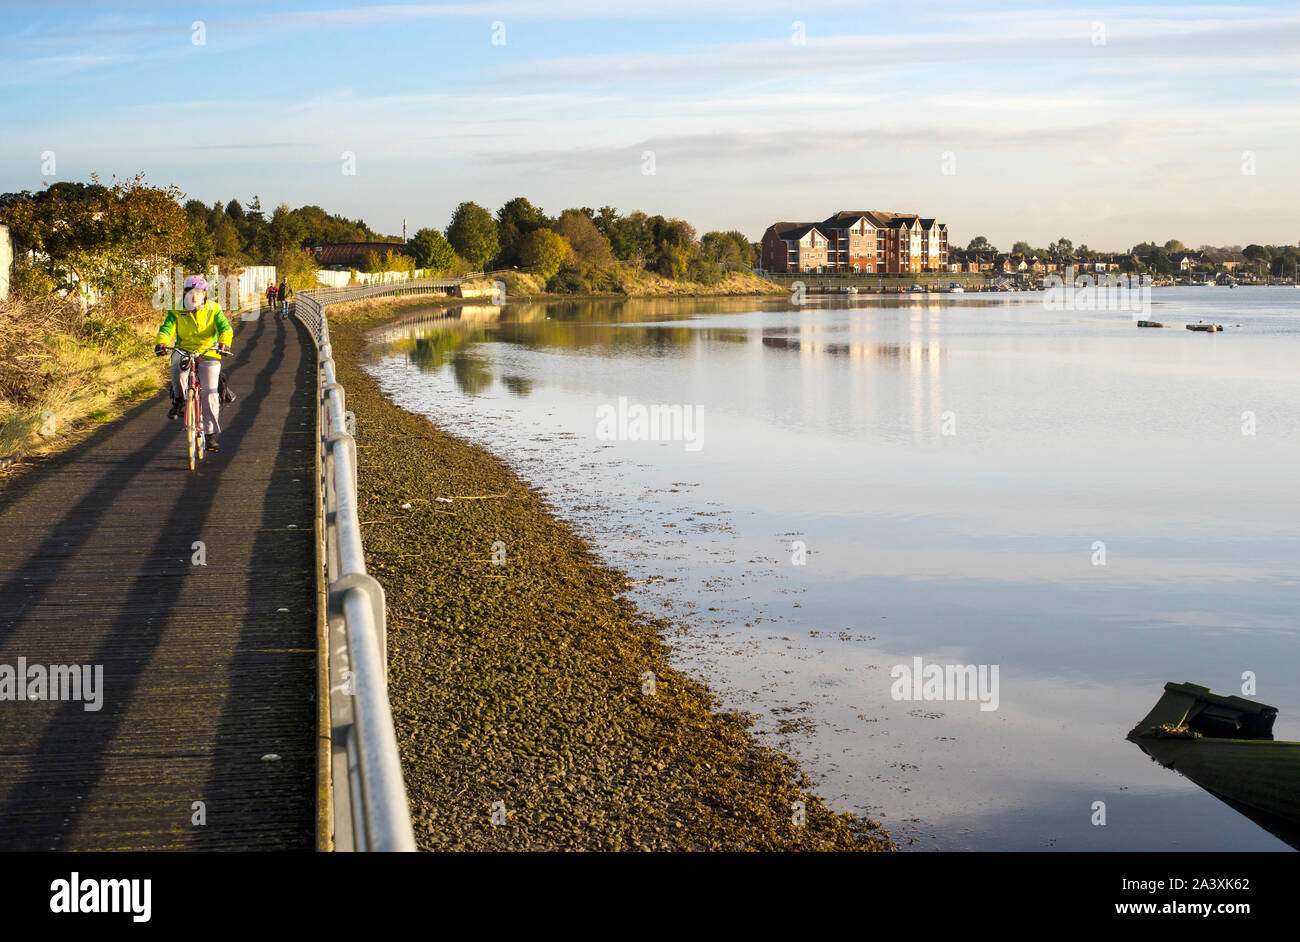 The Itchen Riverside Boardwalk alongside the River Itchen between St Denys and Northam in Southampton. Stock Photo